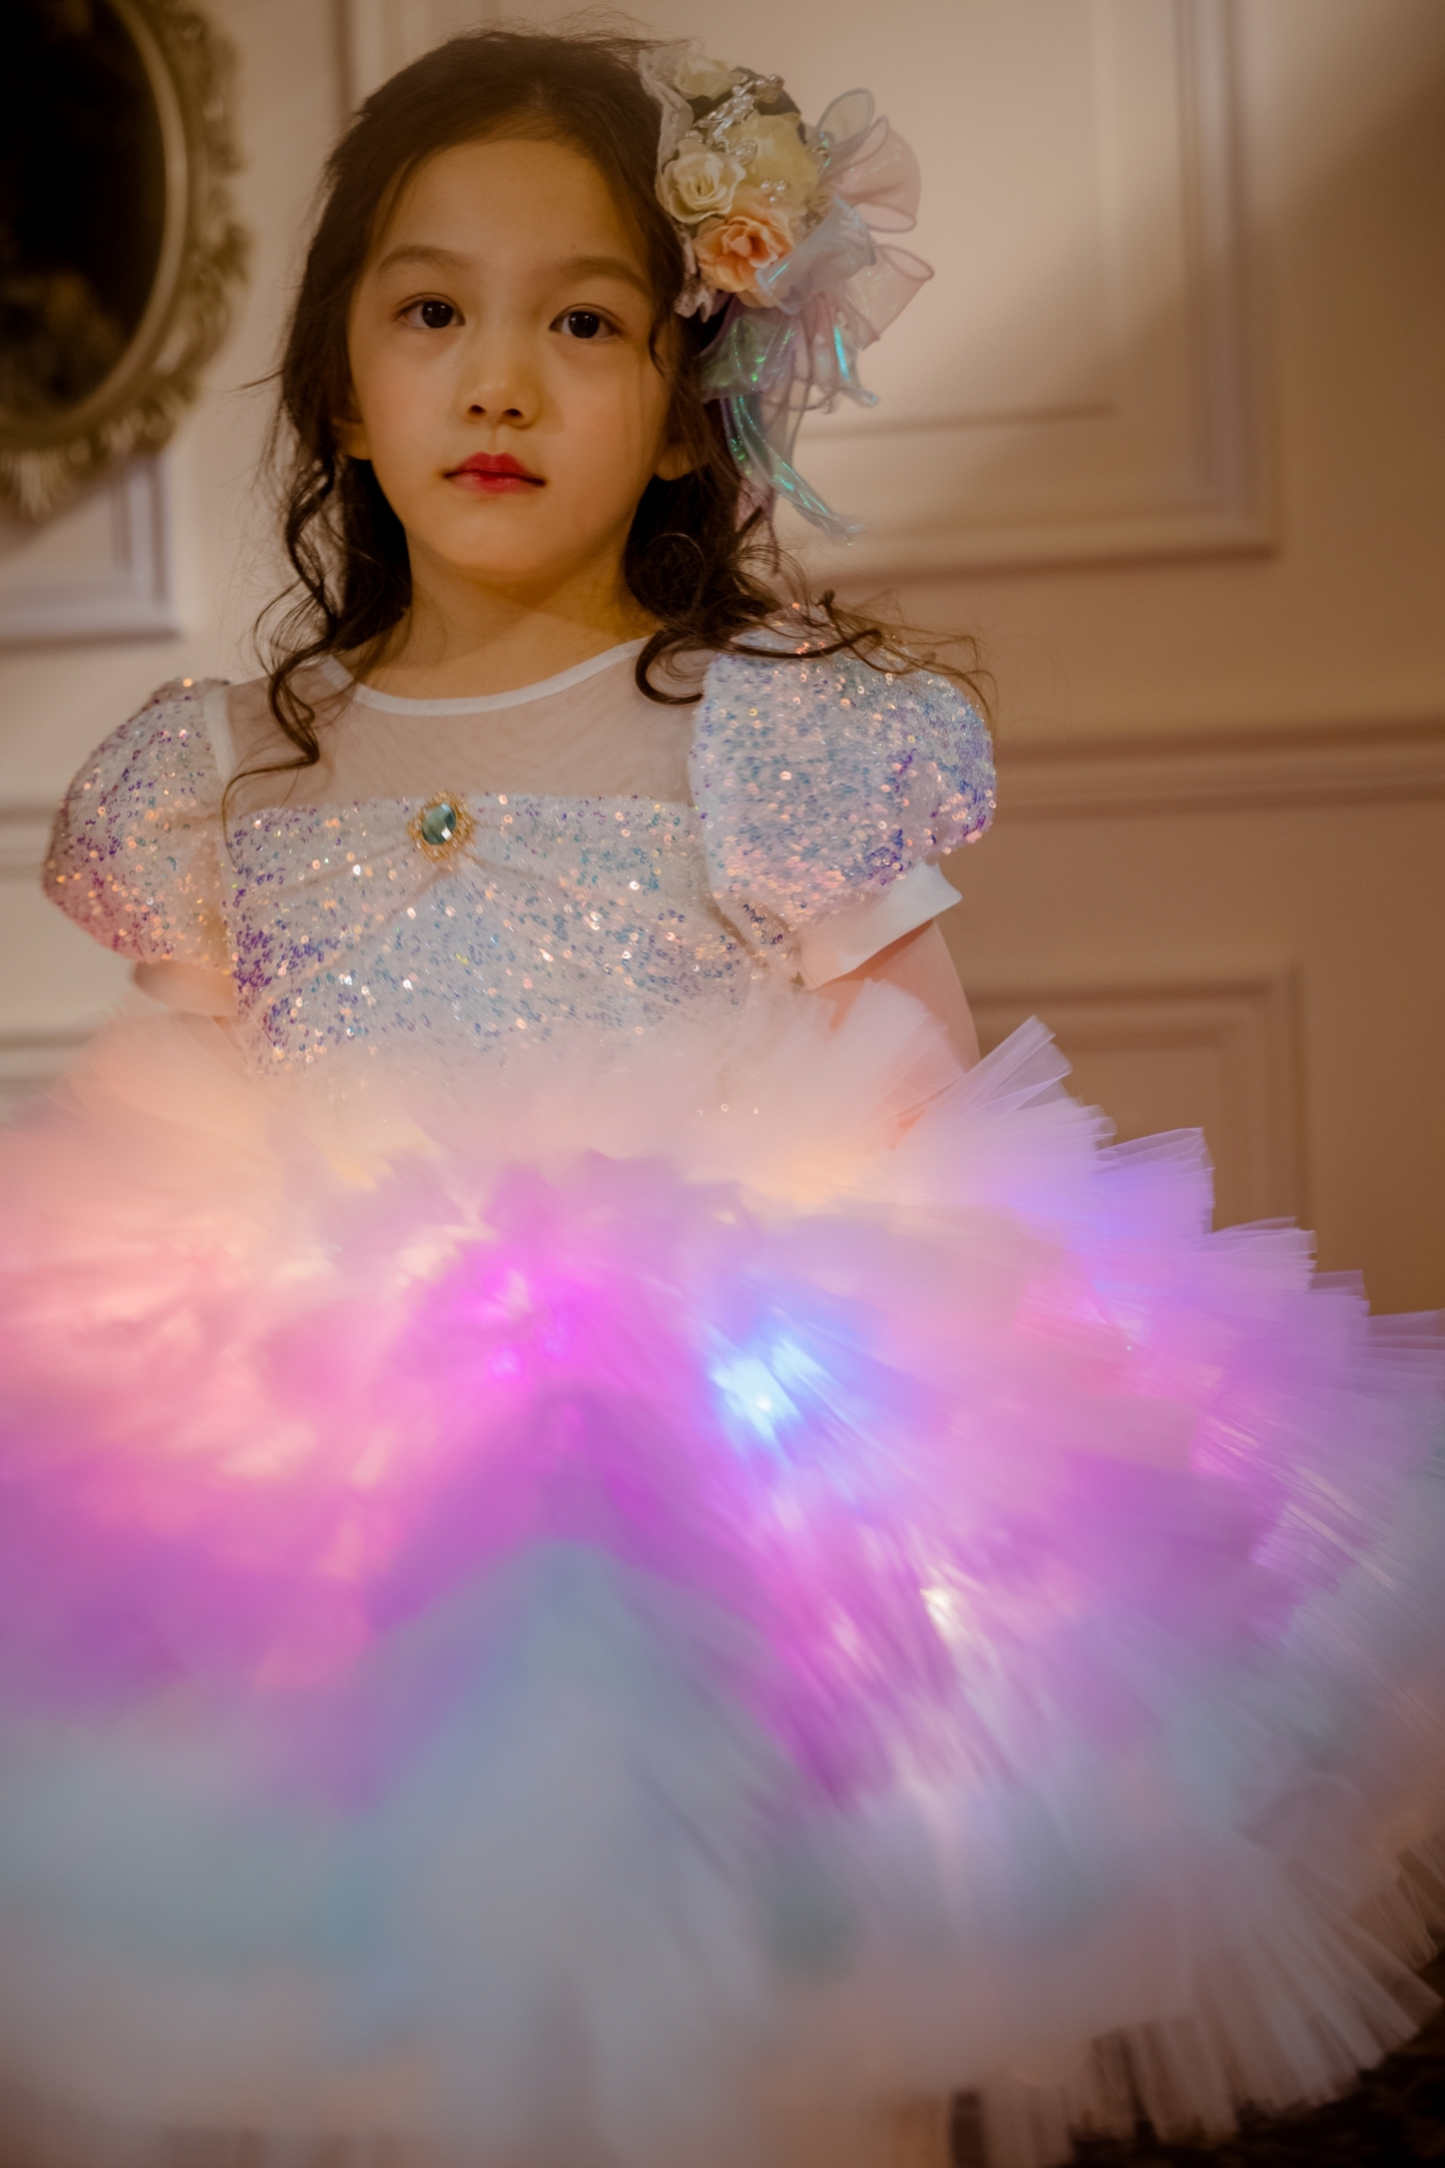 Lilac & Pink Sugar Plum Fairy Ombre Tulle Dress